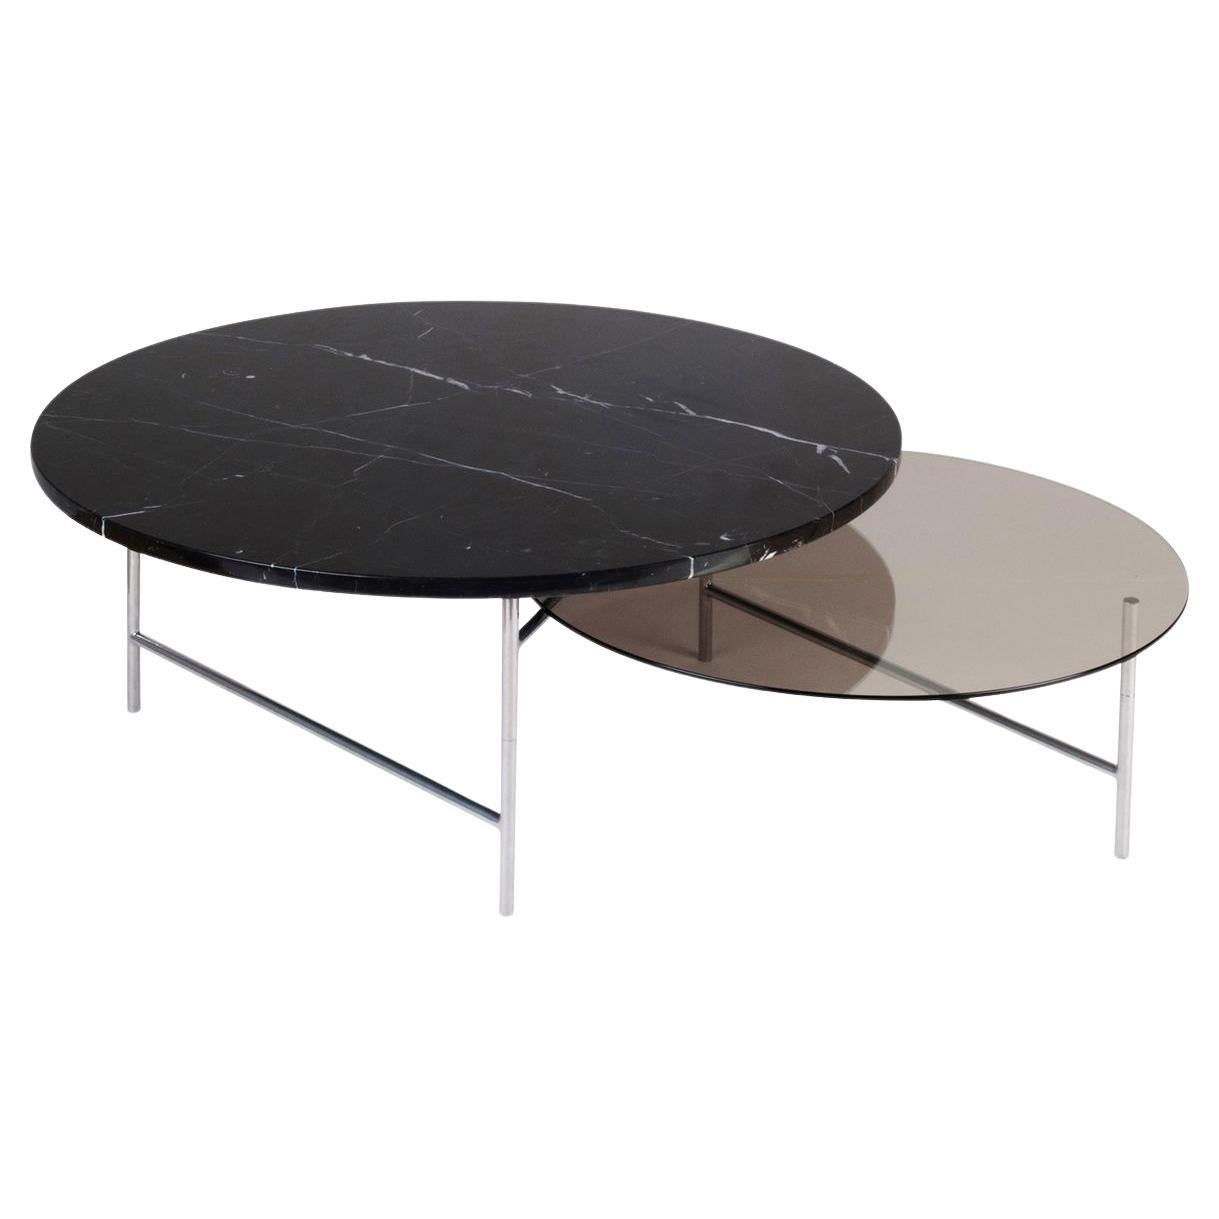 Zorro Coffee Table Black Marble Tops Polished Steel Leg By La Chance For Sale